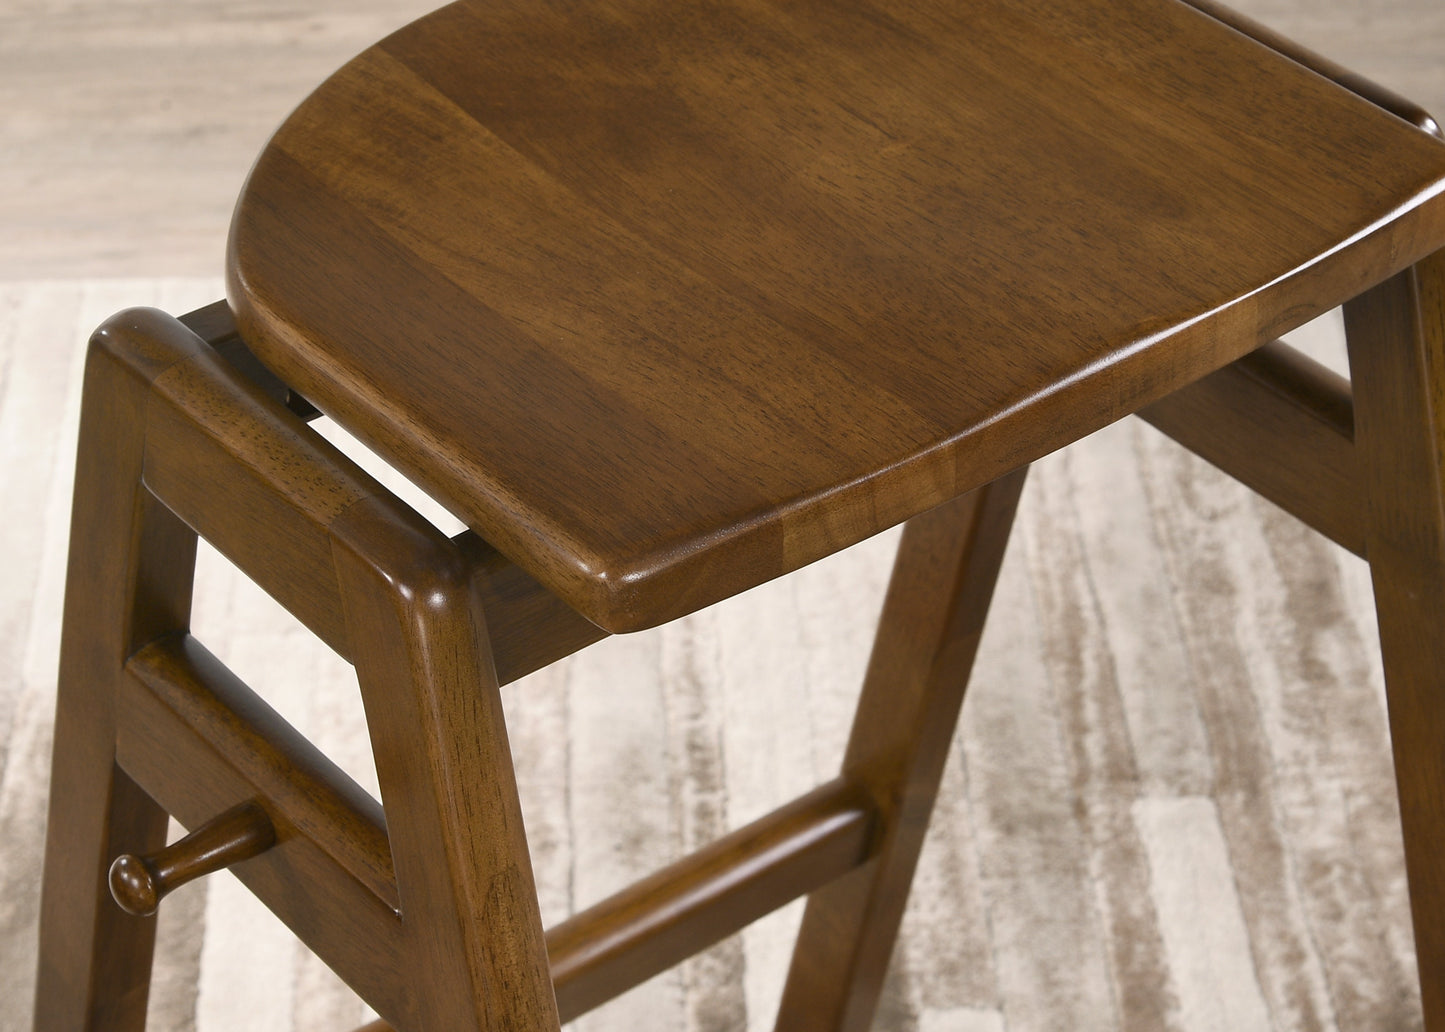 Malvern Wood Pub Table with Faux Leather Upholstered Barstools